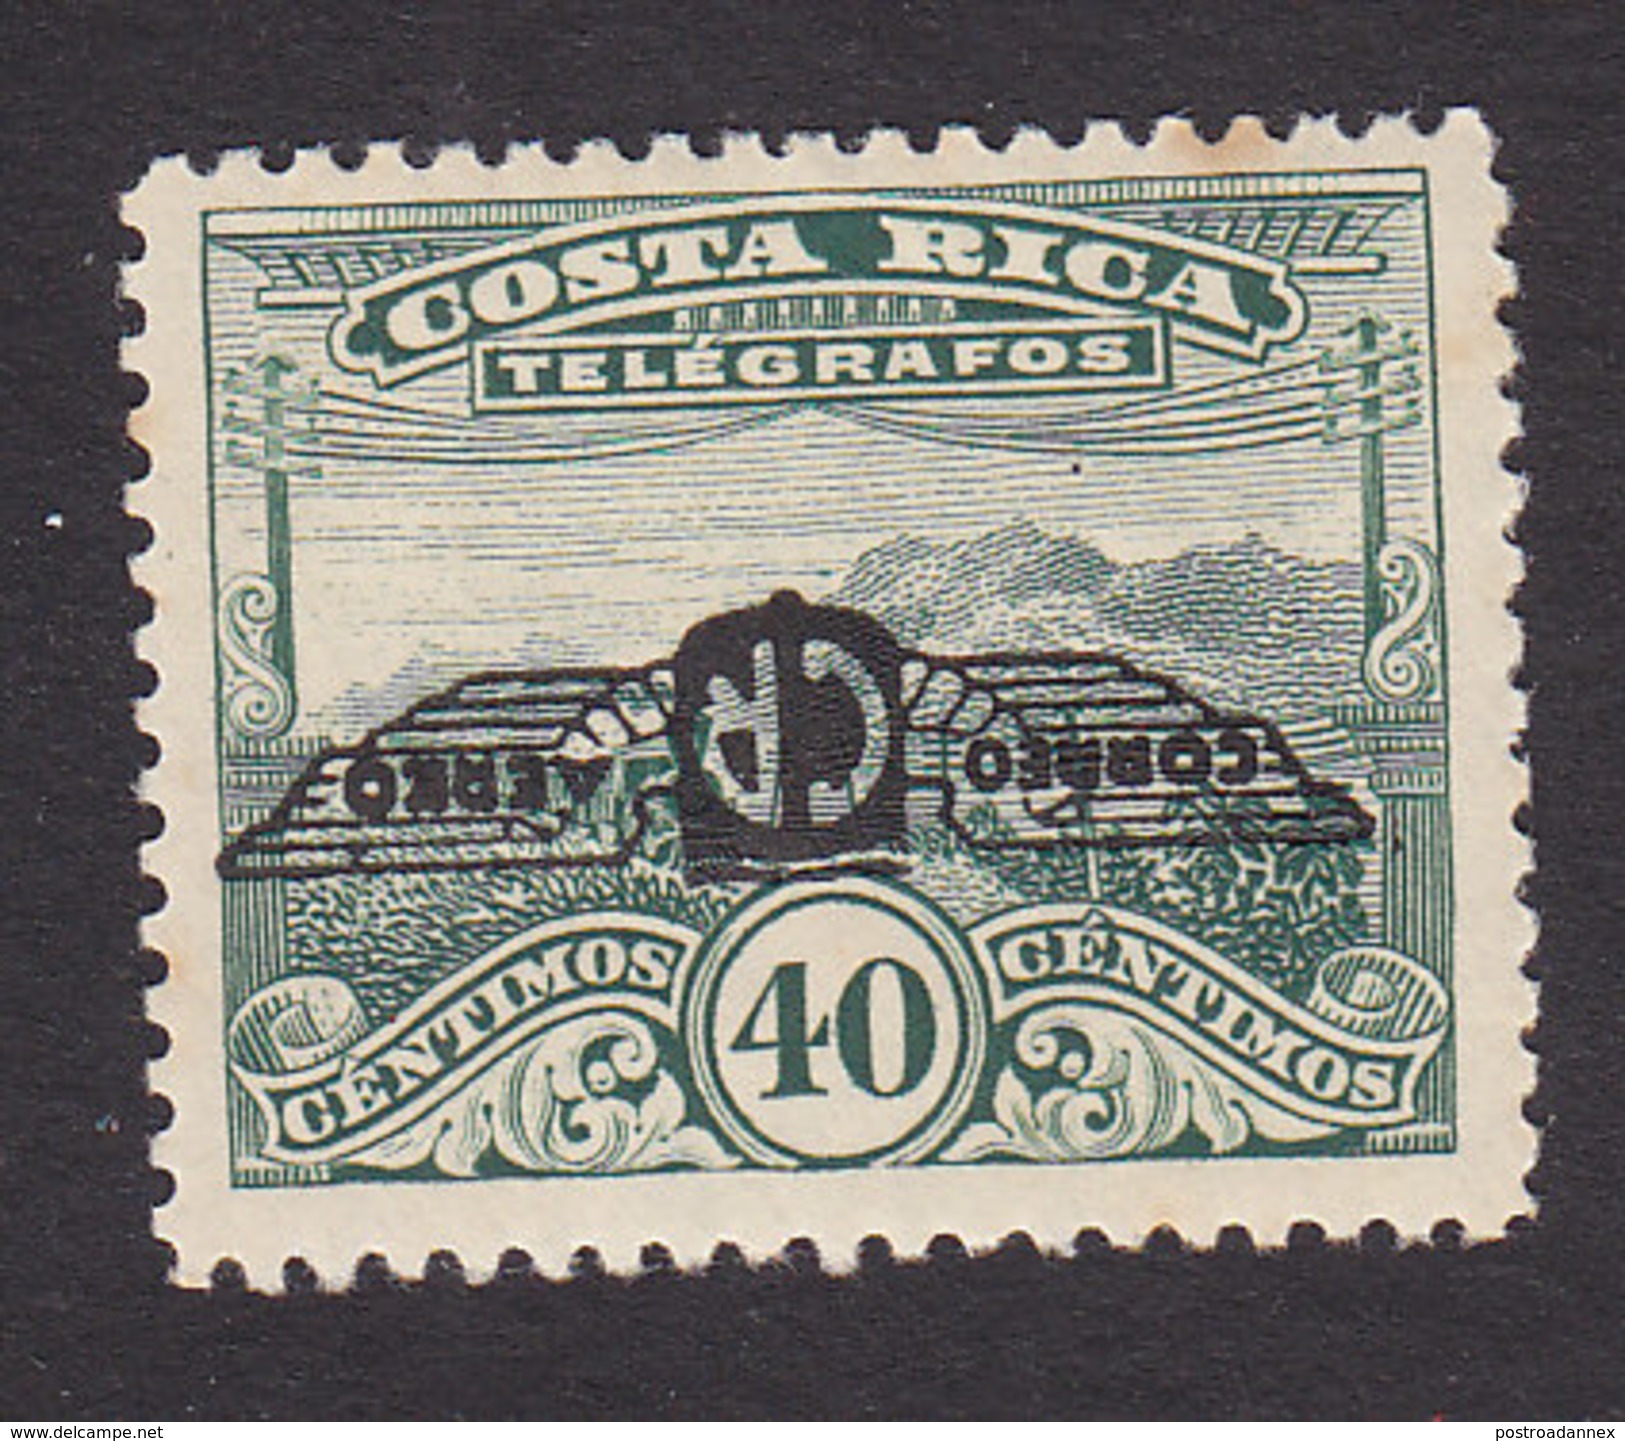 Costa Rica, Scott #C14a, Mint Hinged, Telegraph Stamp Overprinted, Issued 1932 - Costa Rica